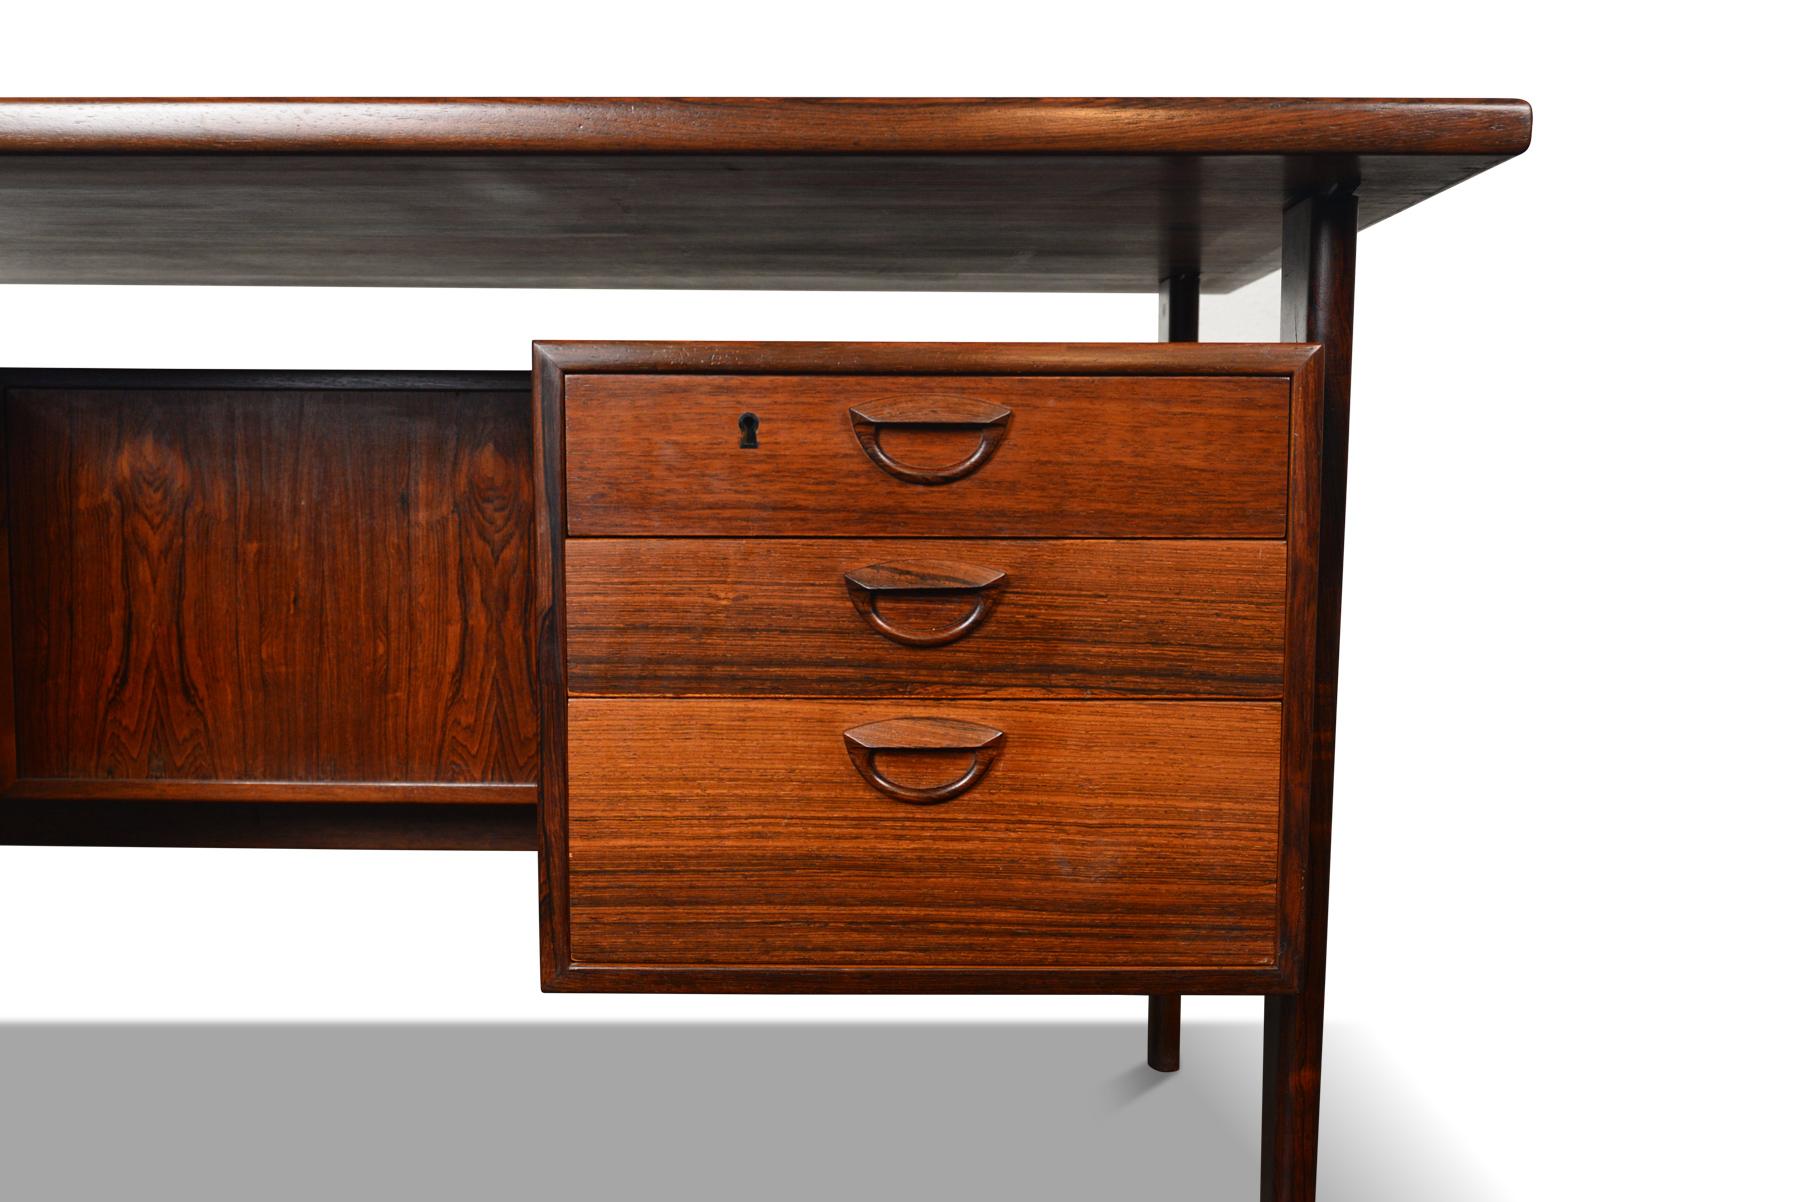 This Danish modern executive desk Model FM 60 in Brazilian rosewood was designed by Kai Kristiansen for Feldballes Møbelfabrik in 1957. The large work surface is supported by four sculpted legs which key into place. The kneehole is nestled between